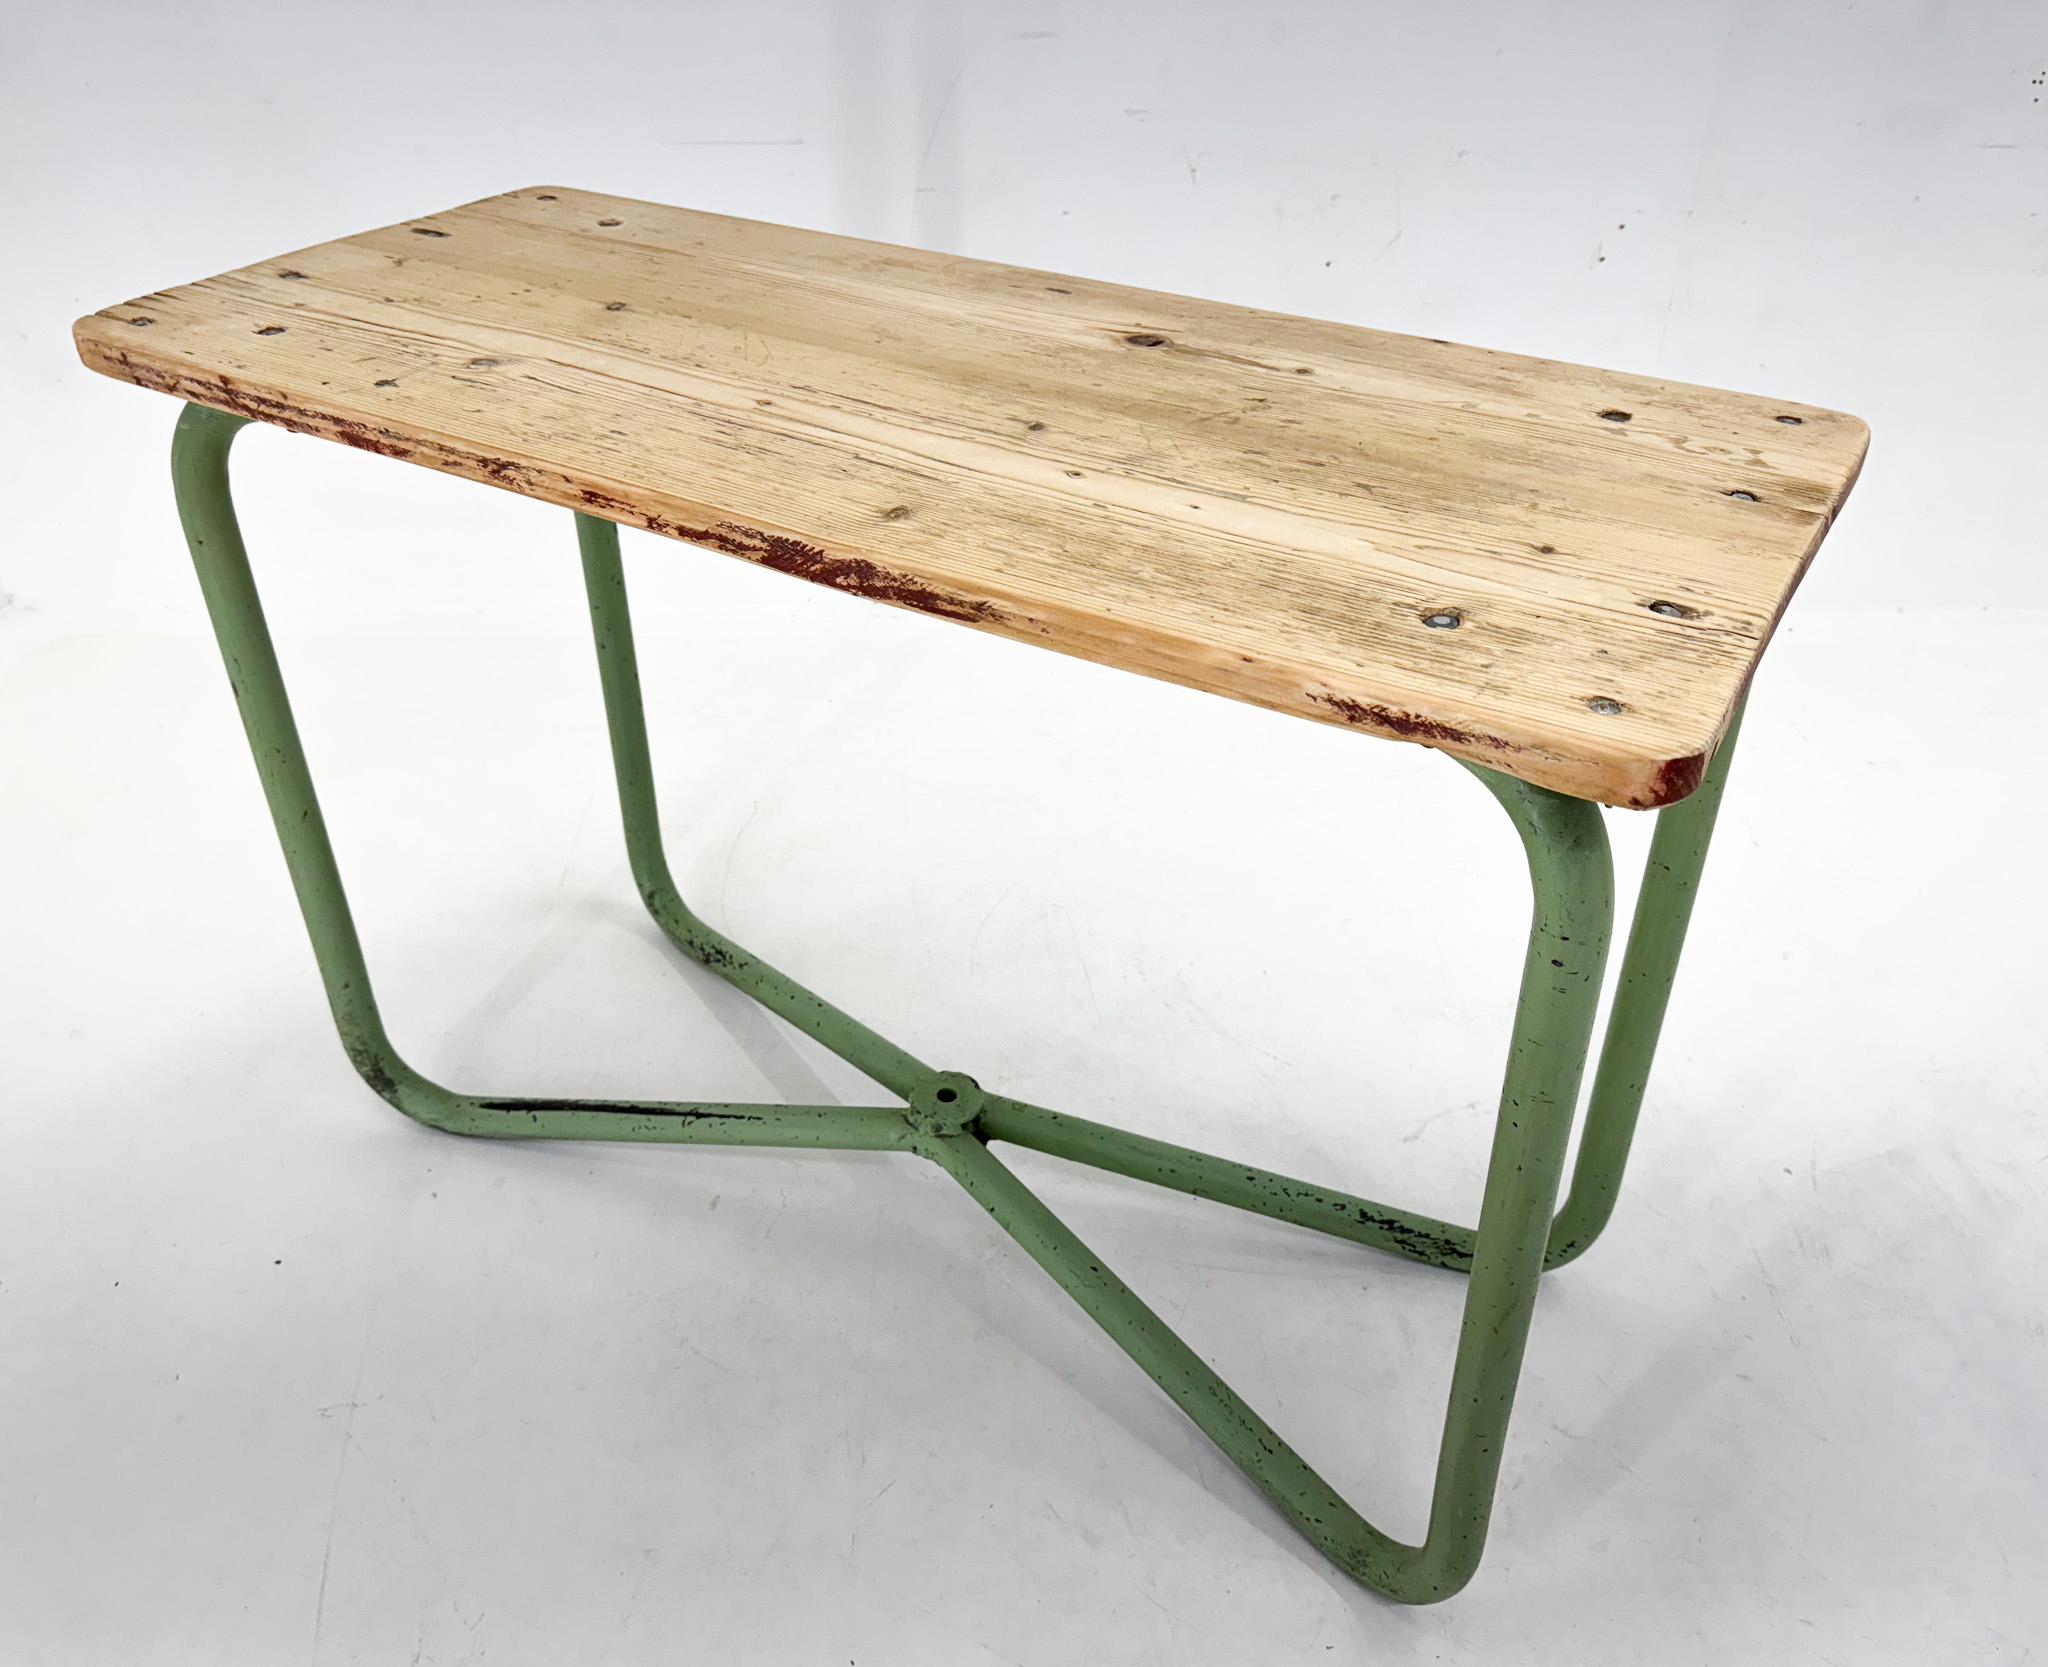 Vintage industrial side table or console table. Original condition. Wooden part was sanded. 